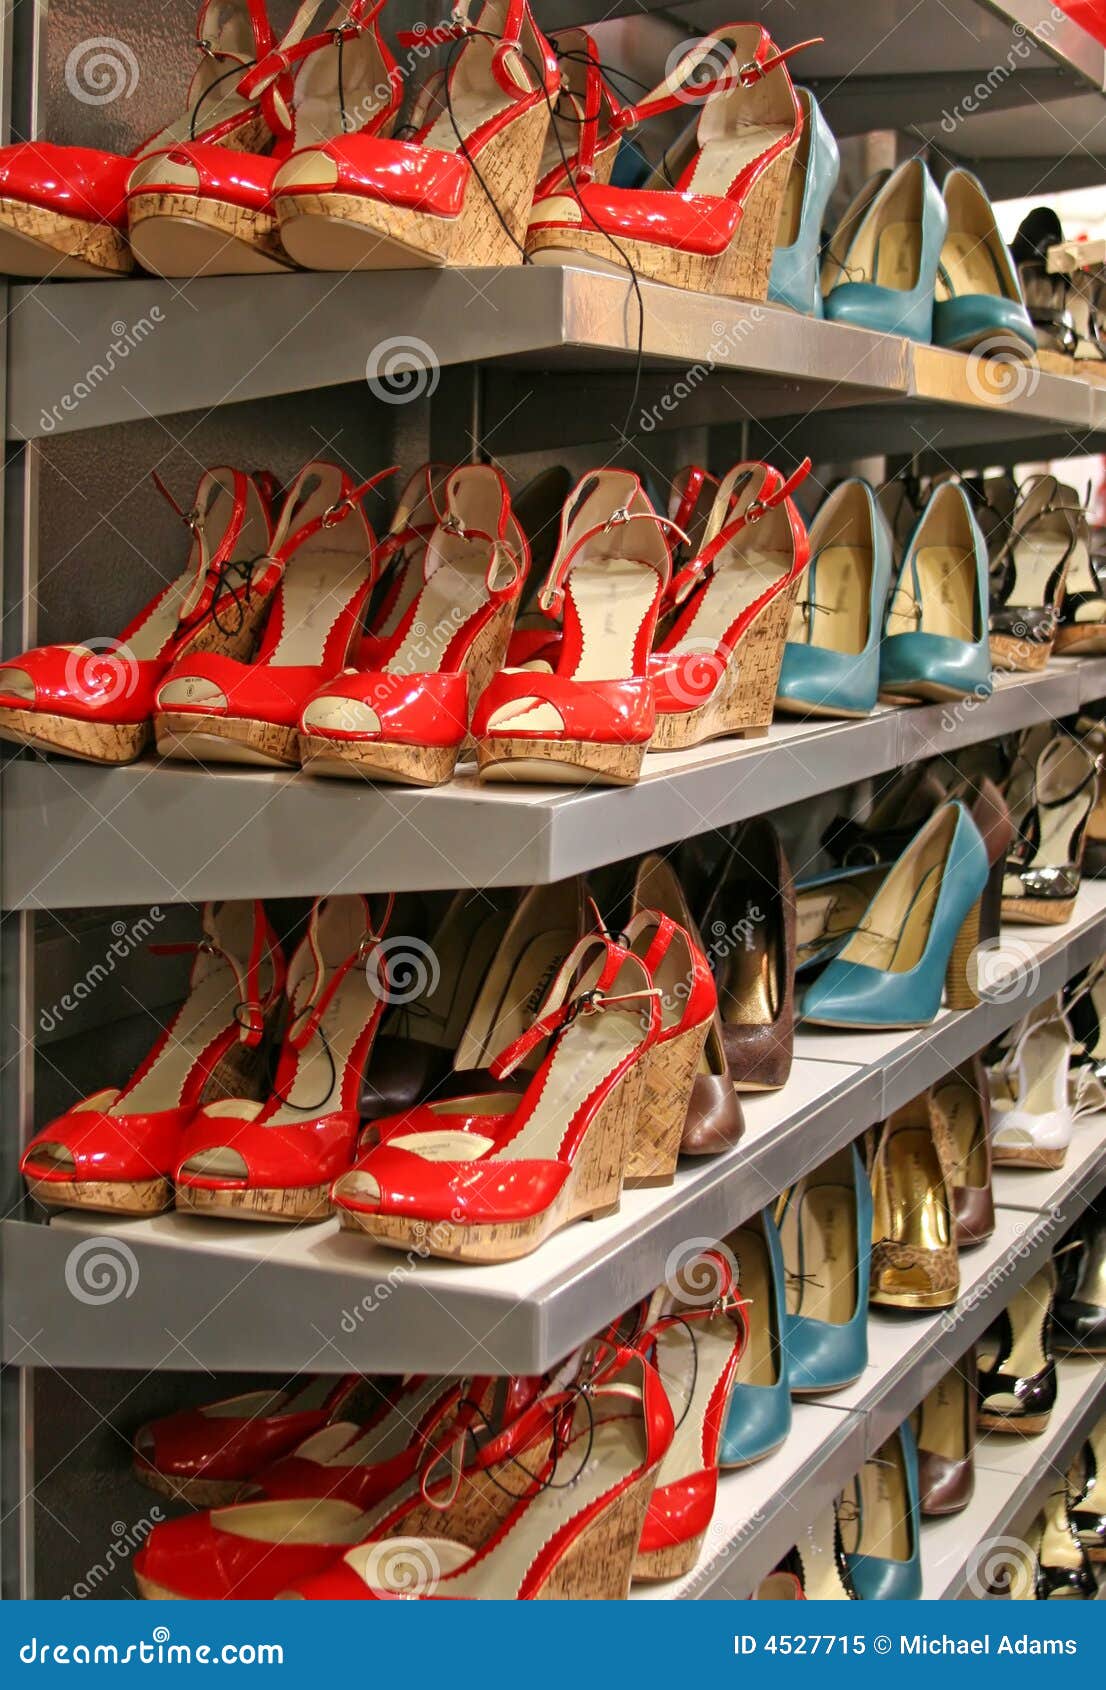 Shoes on a shelf stock image. Image of woman, heels, platforms - 4527715